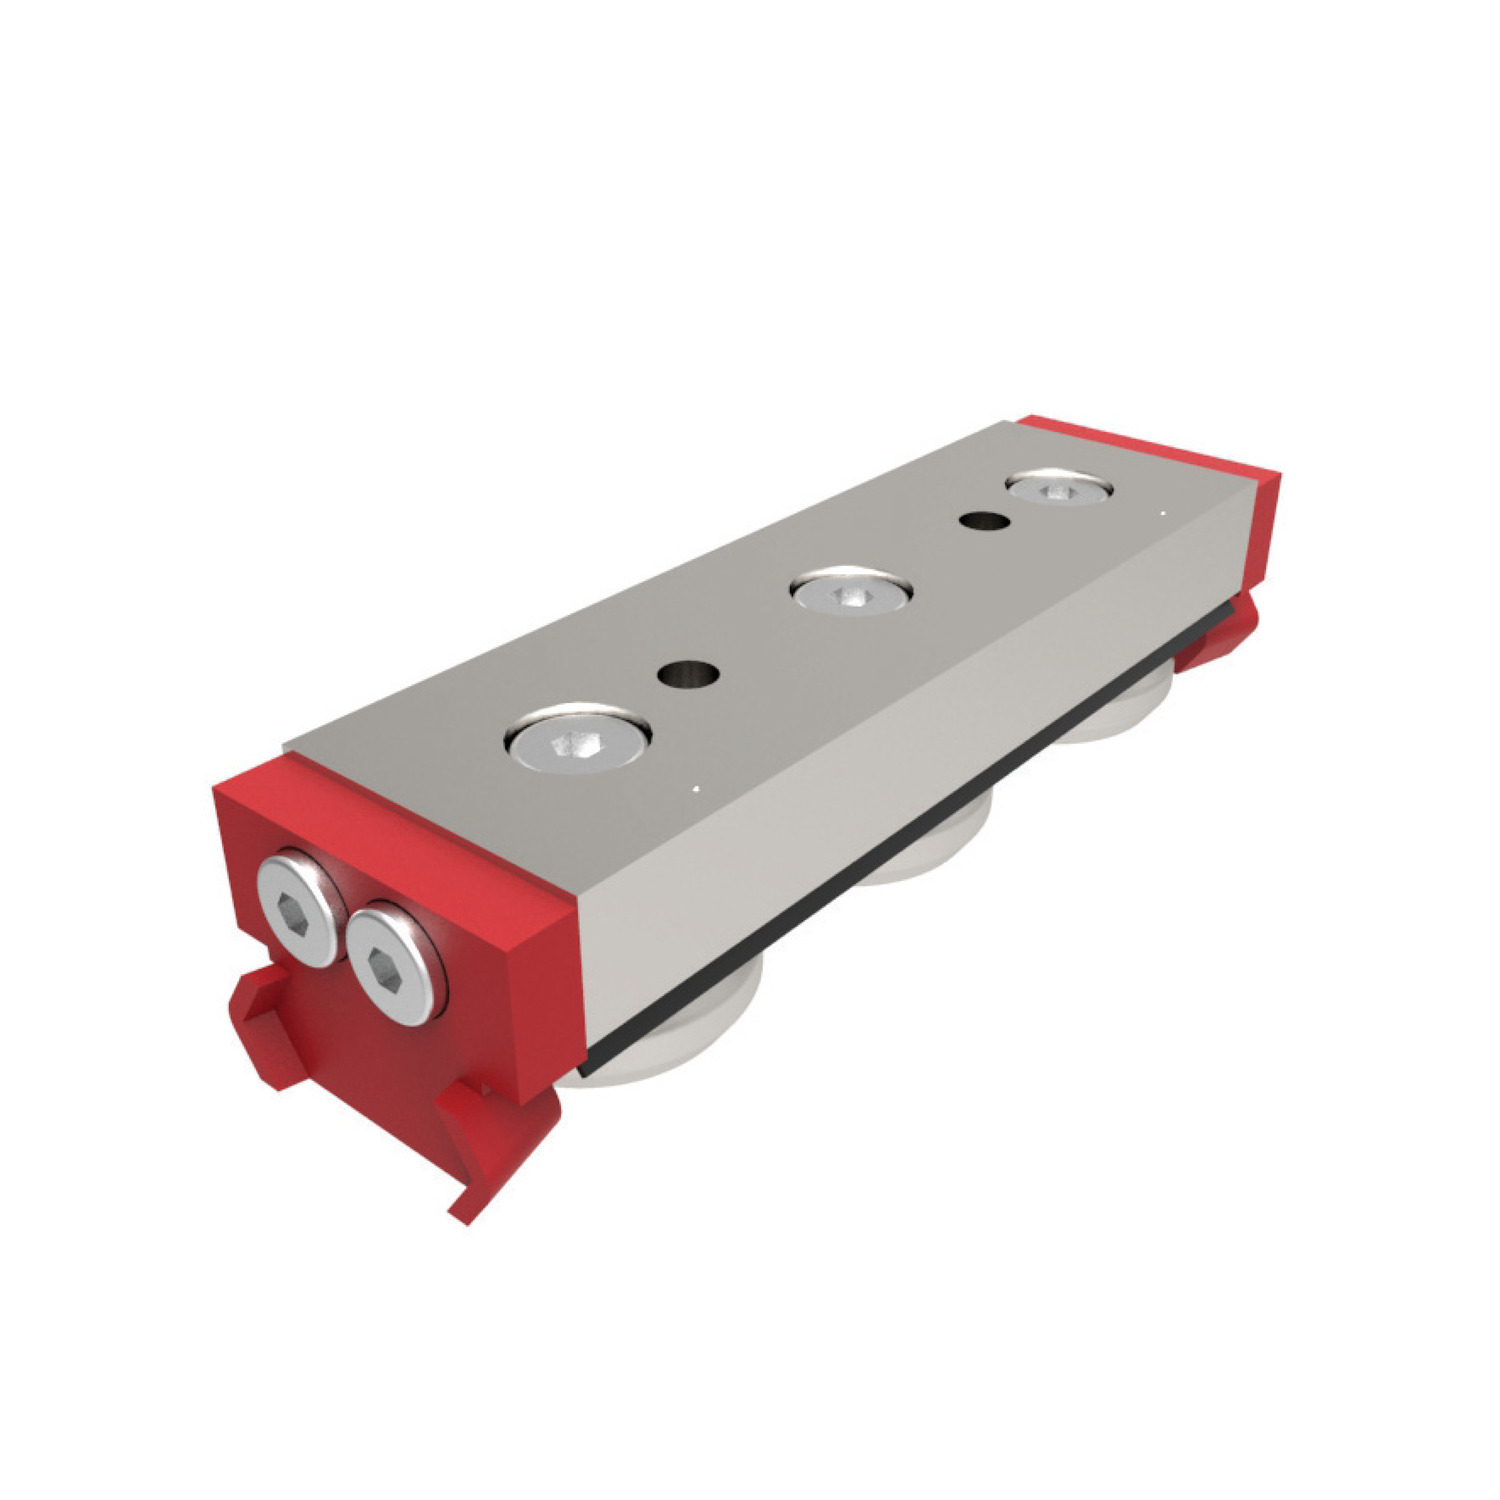 Medium Duty Sliders, size 28 Medium duty compact rail slider. Front fixing with side seal.